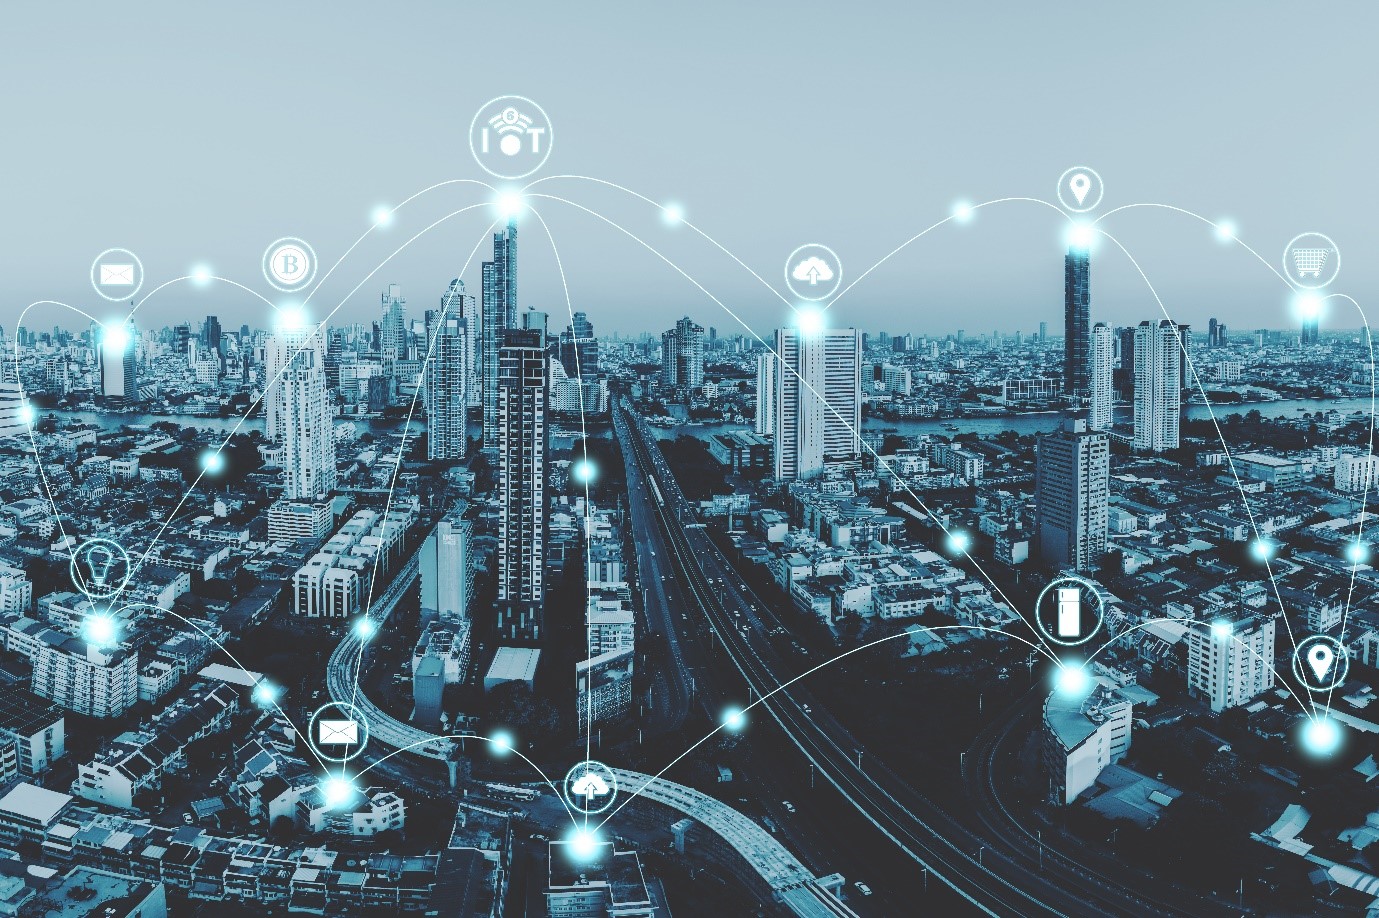 Urban planning and building smart cities based on the Internet of Things using Big Data analytics